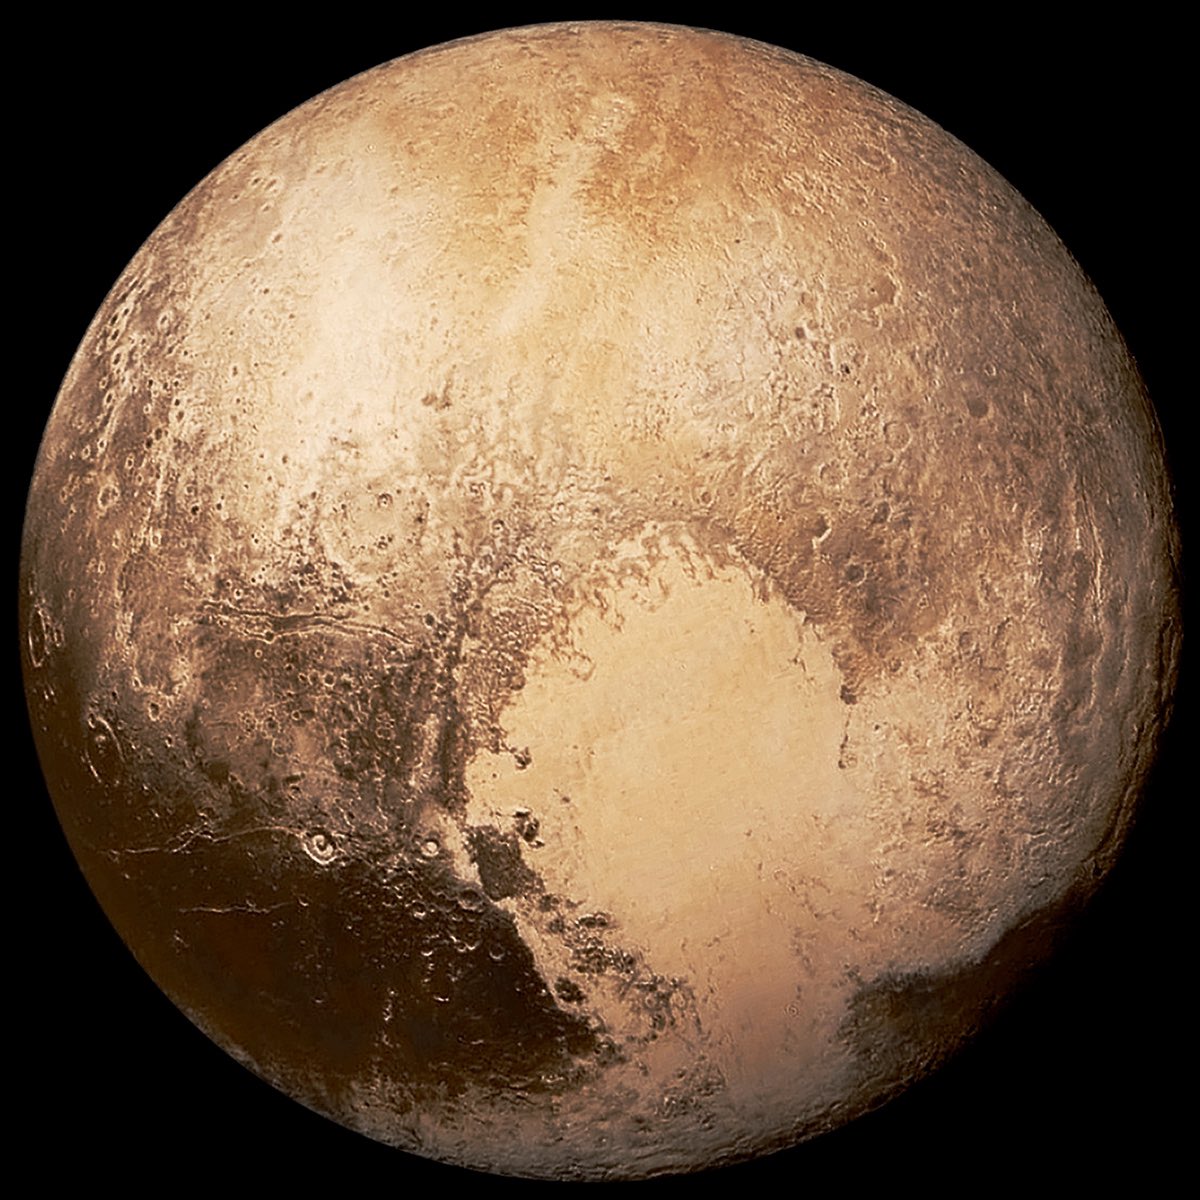 Thank you, Pluto, the guardian and gatekeeper of our solar system, for reminding me of my “why” during this hard time. And shout out to the teams at  @NASA  @JHUAPL and  @SwRI for making this photo a reality just when this tiny human being needed it!  9/9